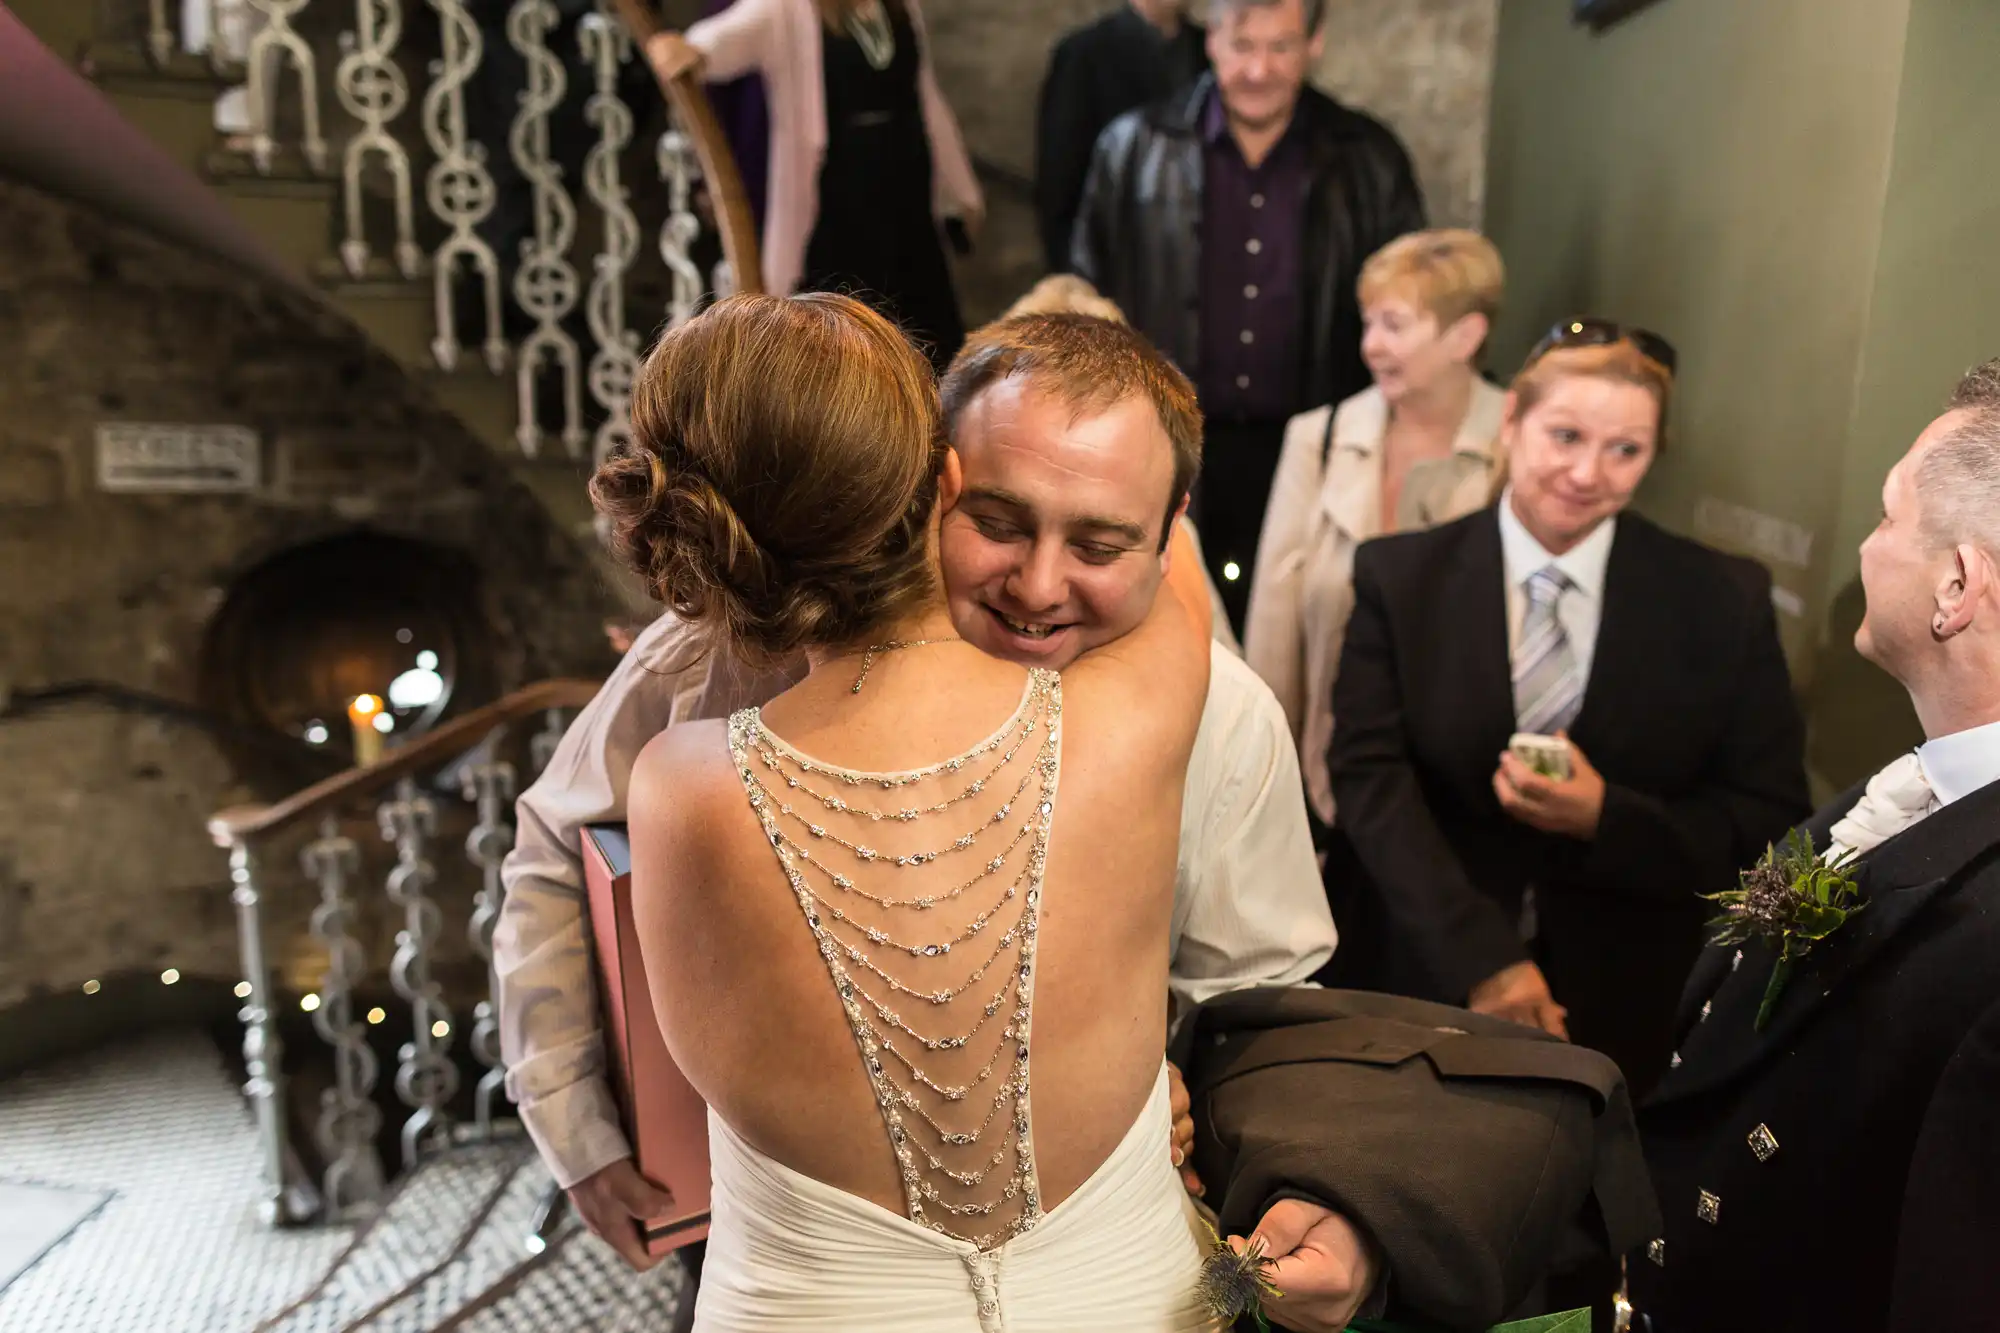 A bride and groom embrace warmly at a wedding reception, guests smiling in the background near a staircase with decorative railings.